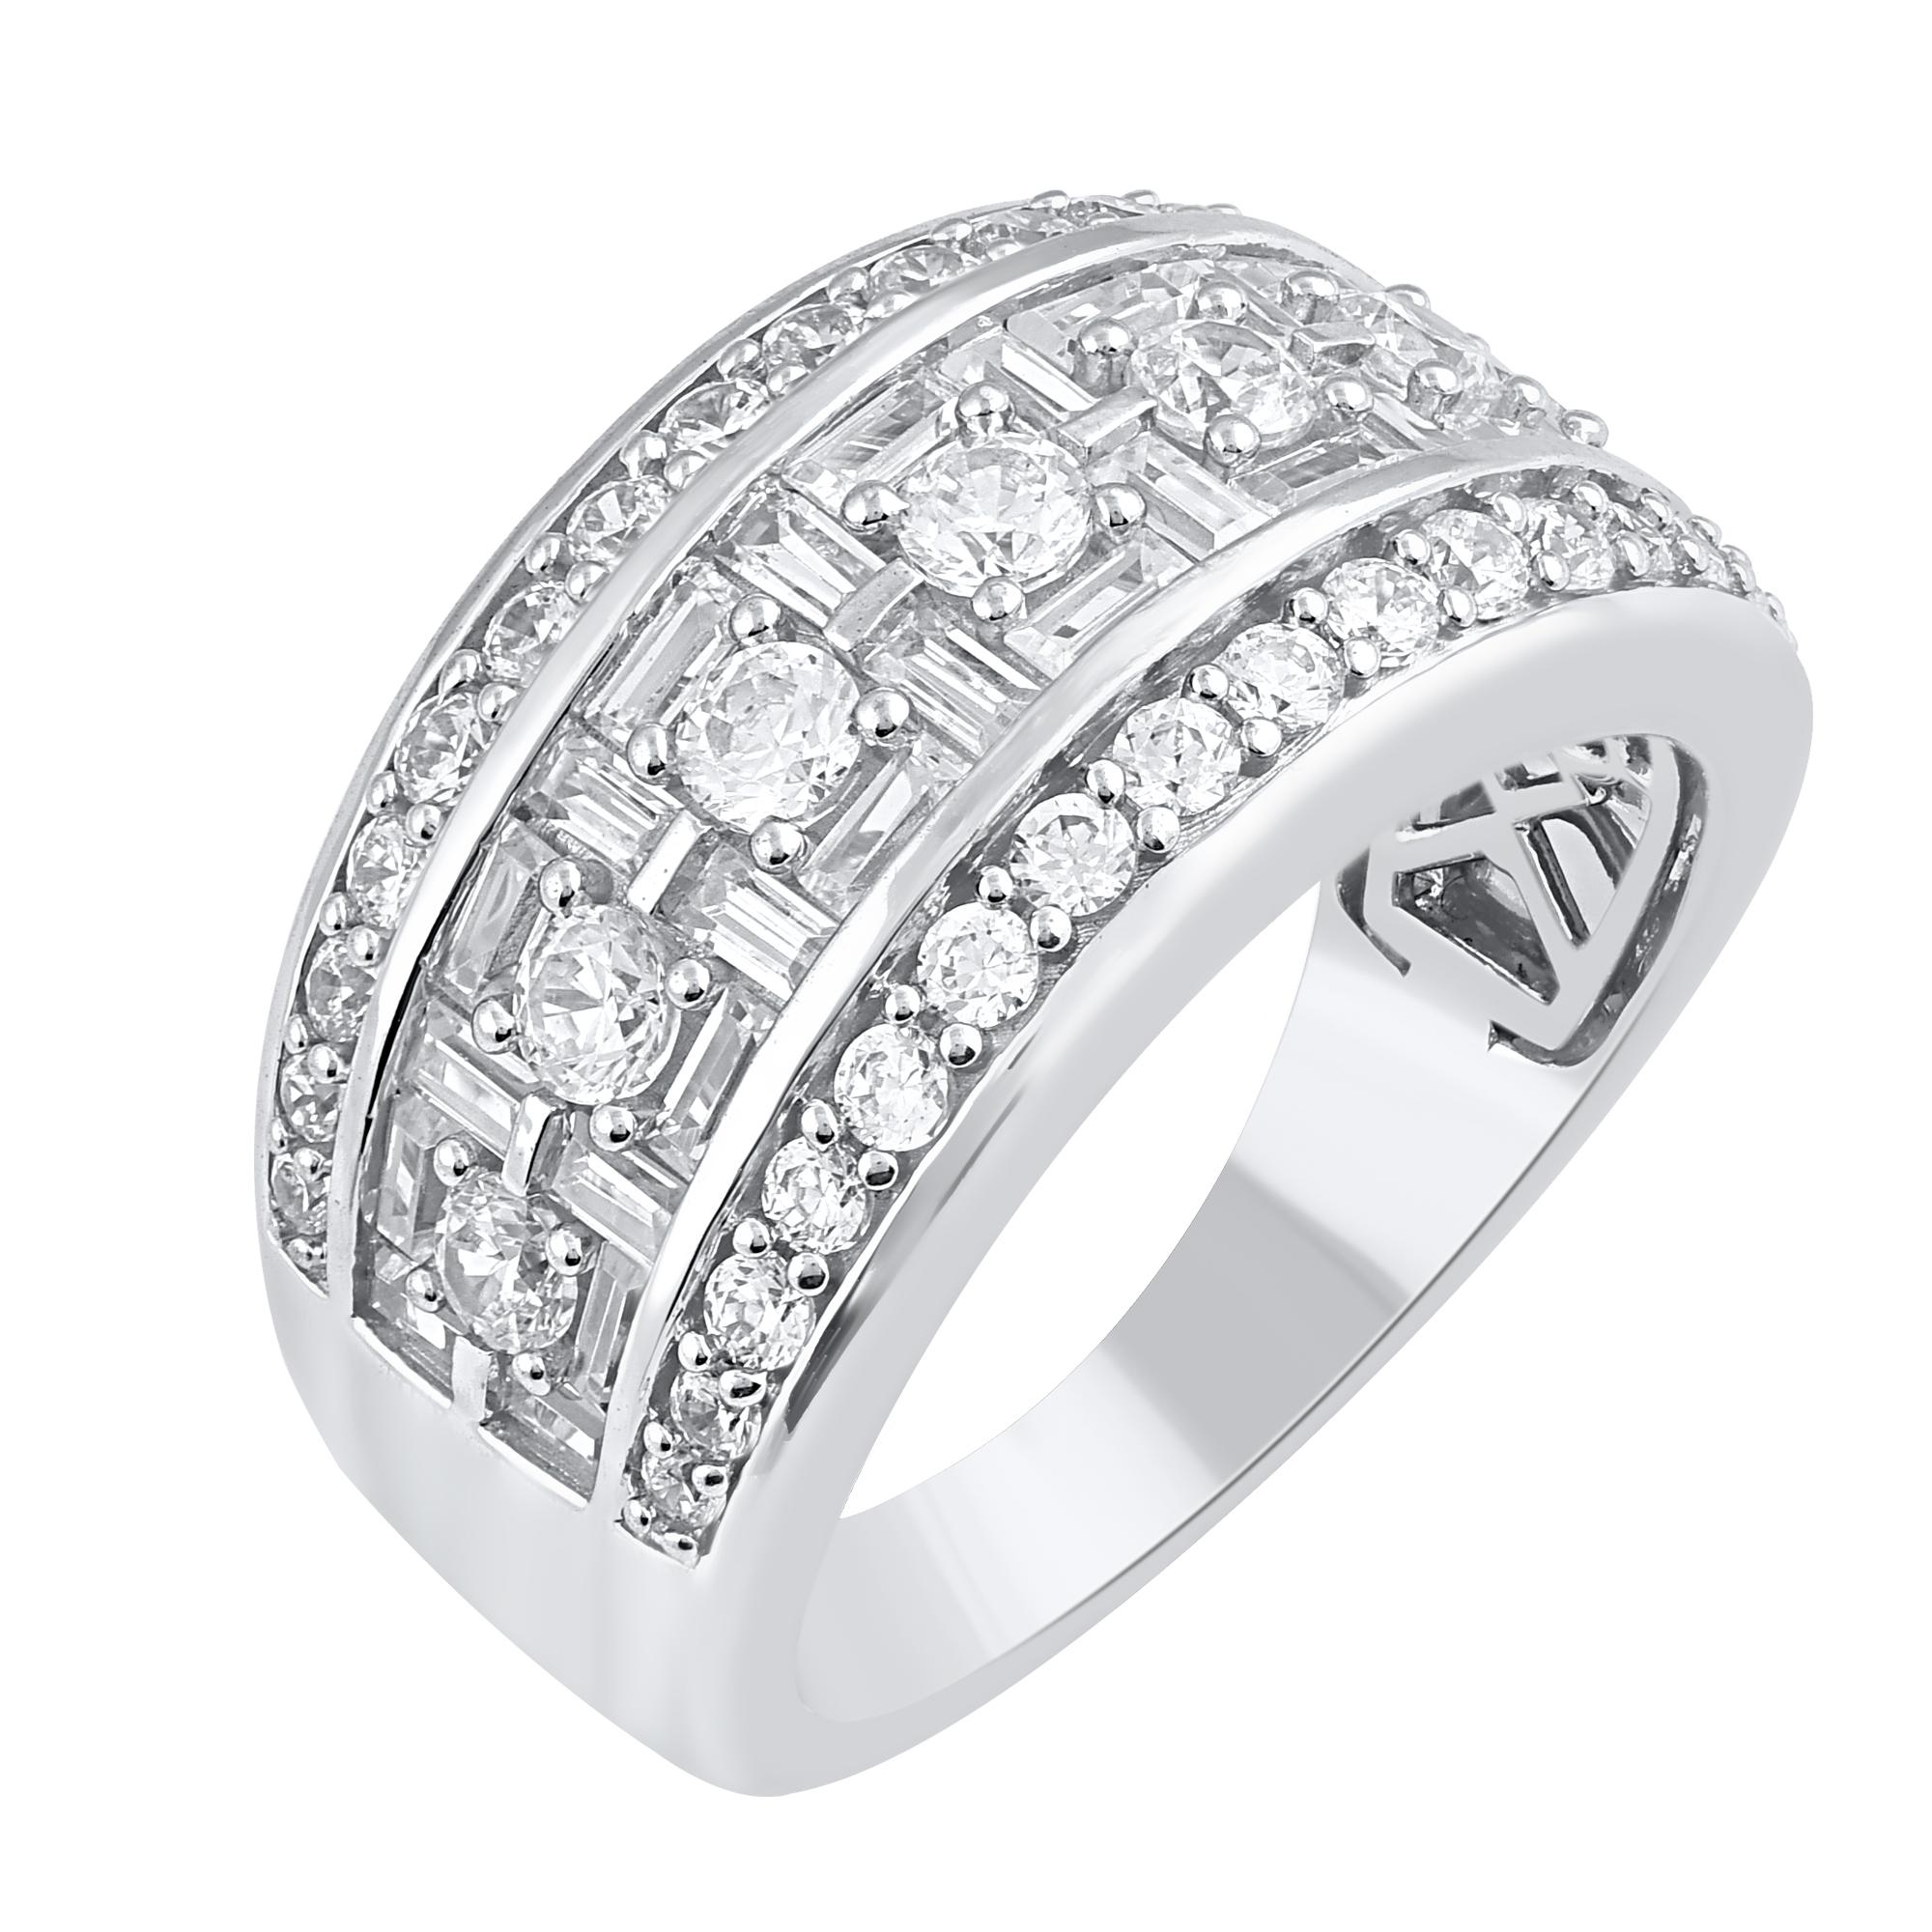 Complete your bridal look with a timeless design. These beautiful wedding band ring is studded with 69 brilliant cut and baguette cut natural diamonds in pave & channel setting. Crafted in 18 karat white gold. The total diamond weight of these